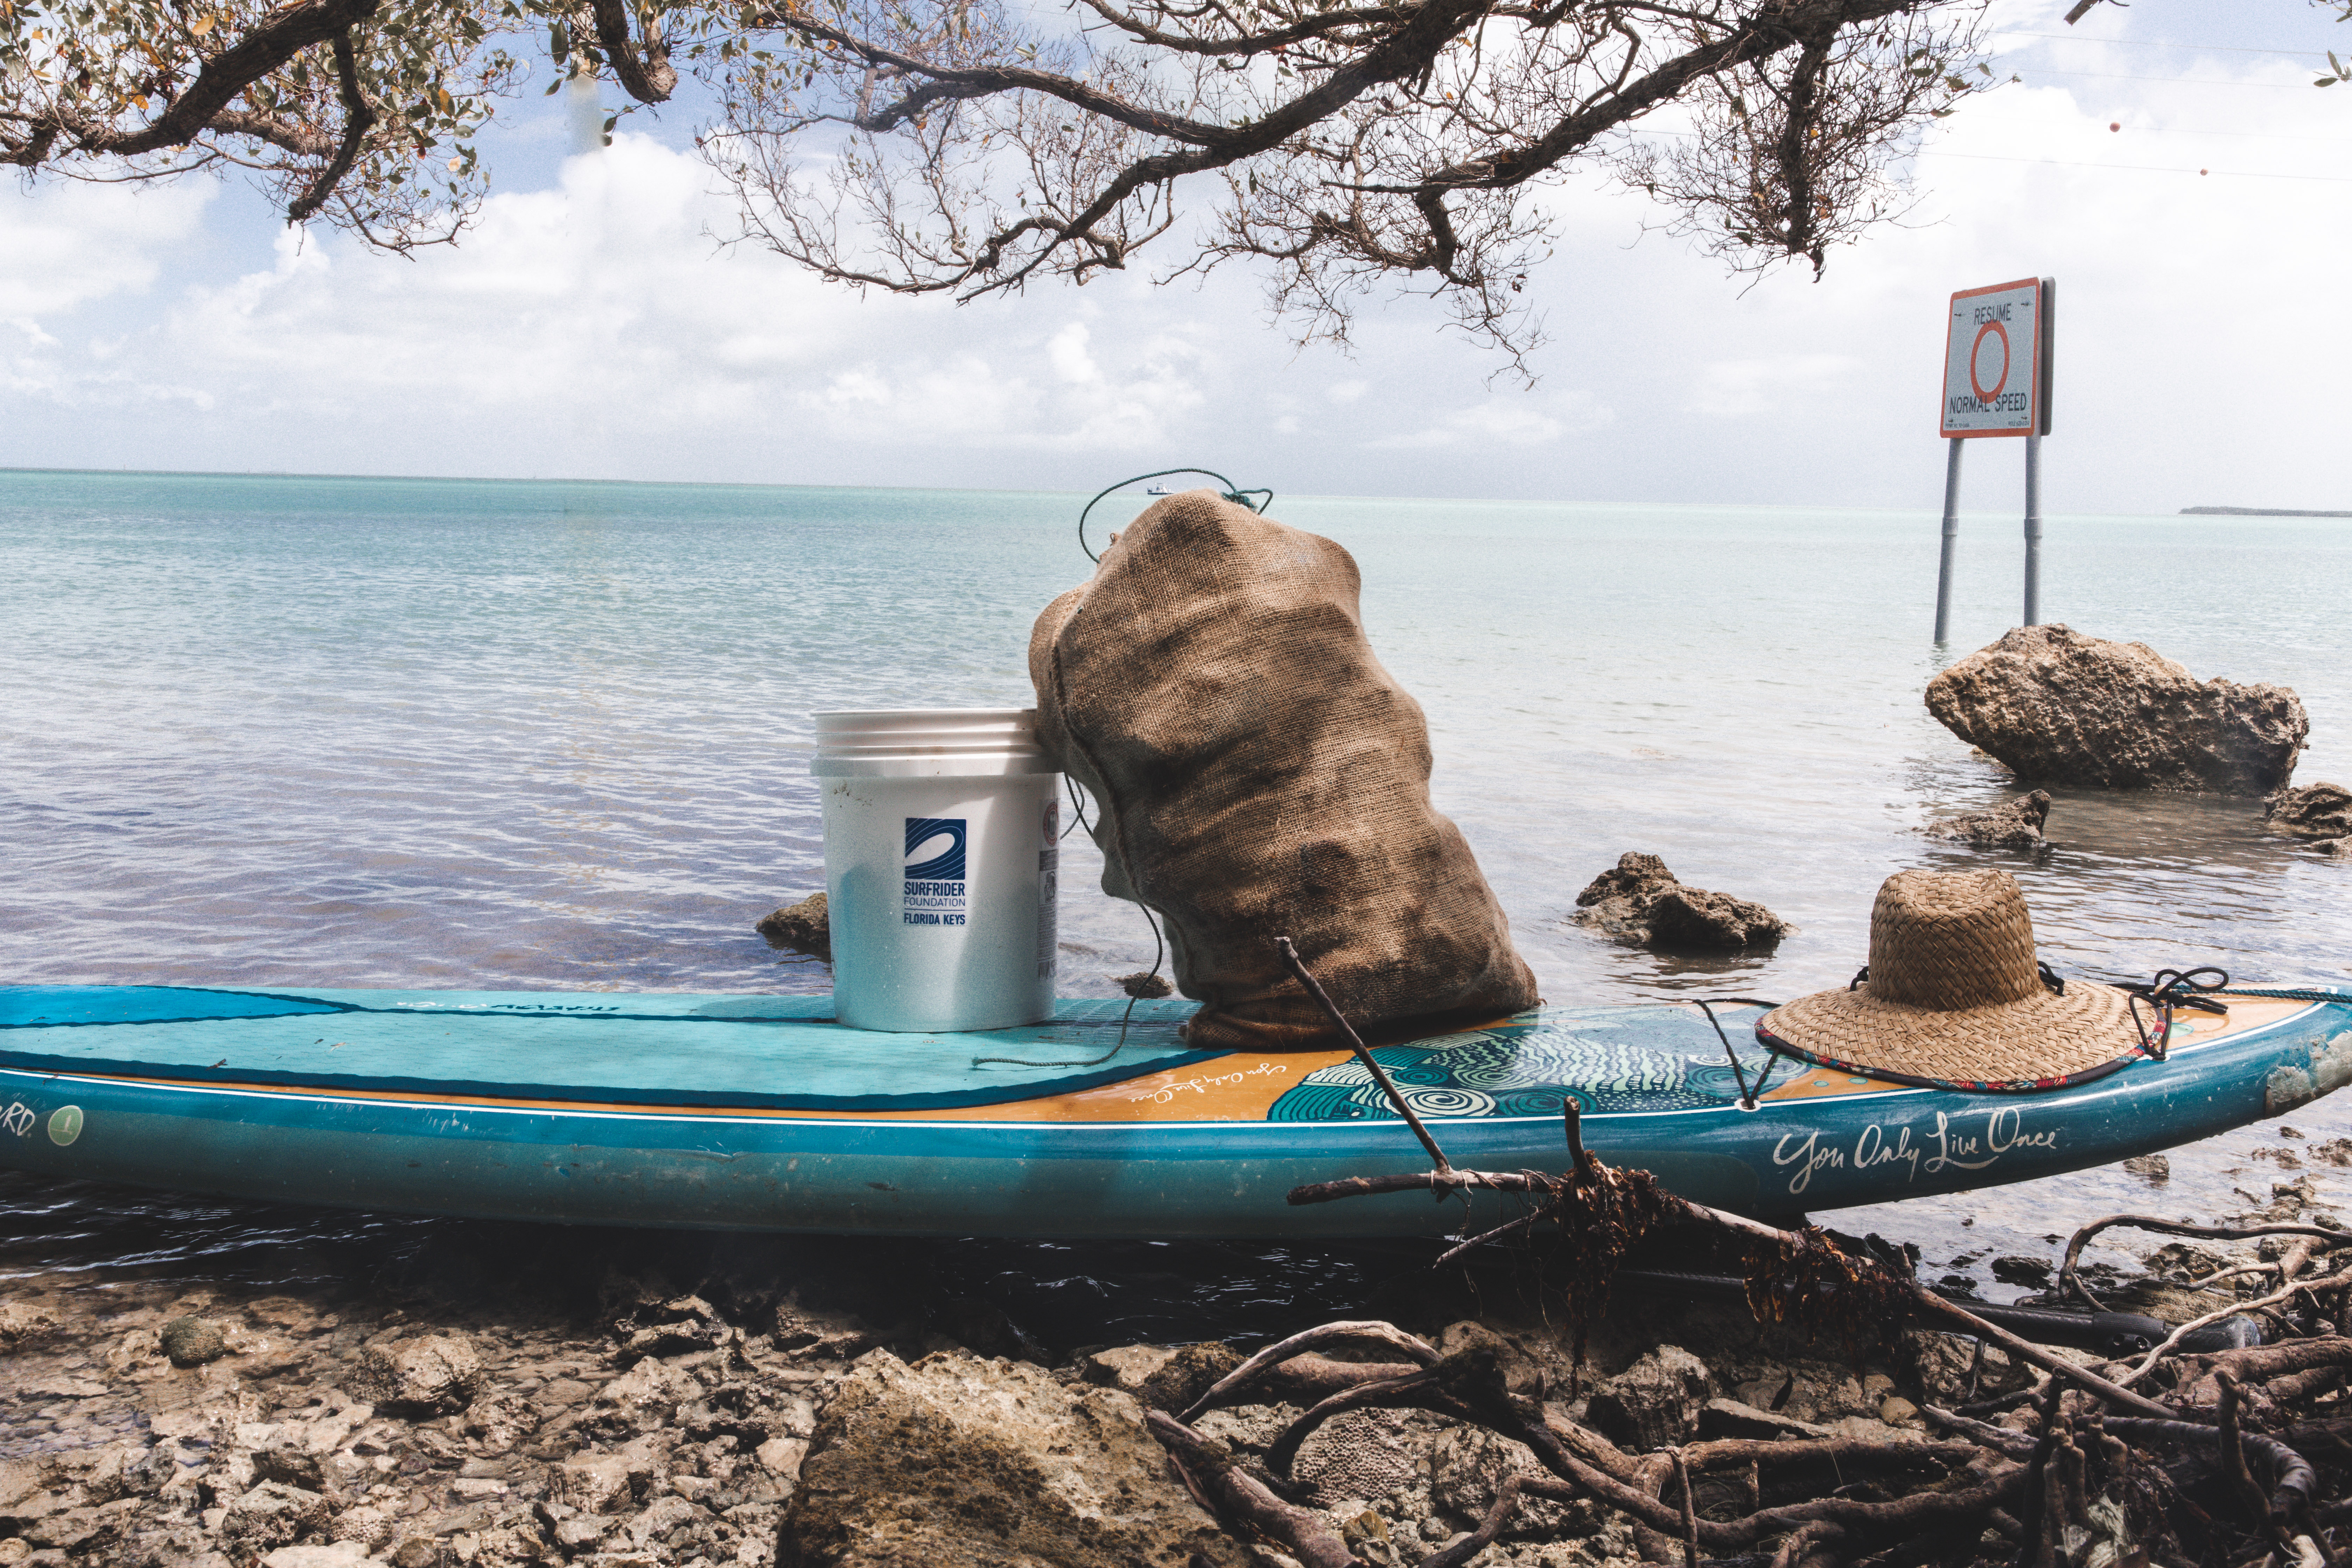 A bag of trash, a bucket, and bag of trash sit on a surf board near the water